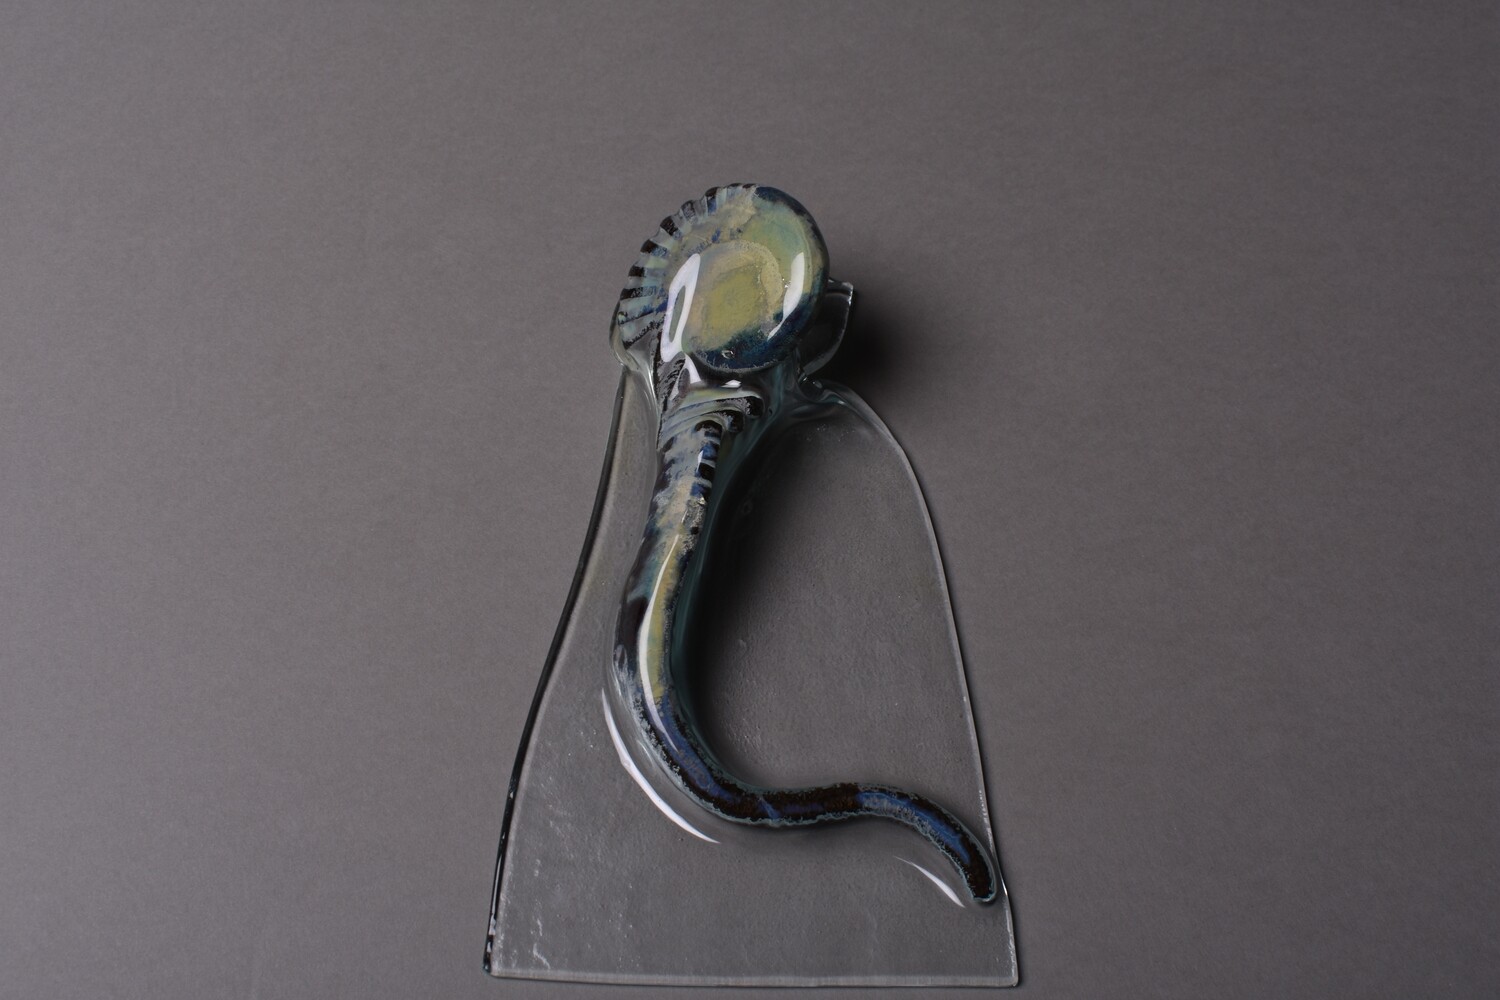 Ferro-Genesis 1, forged steel, silver and glass